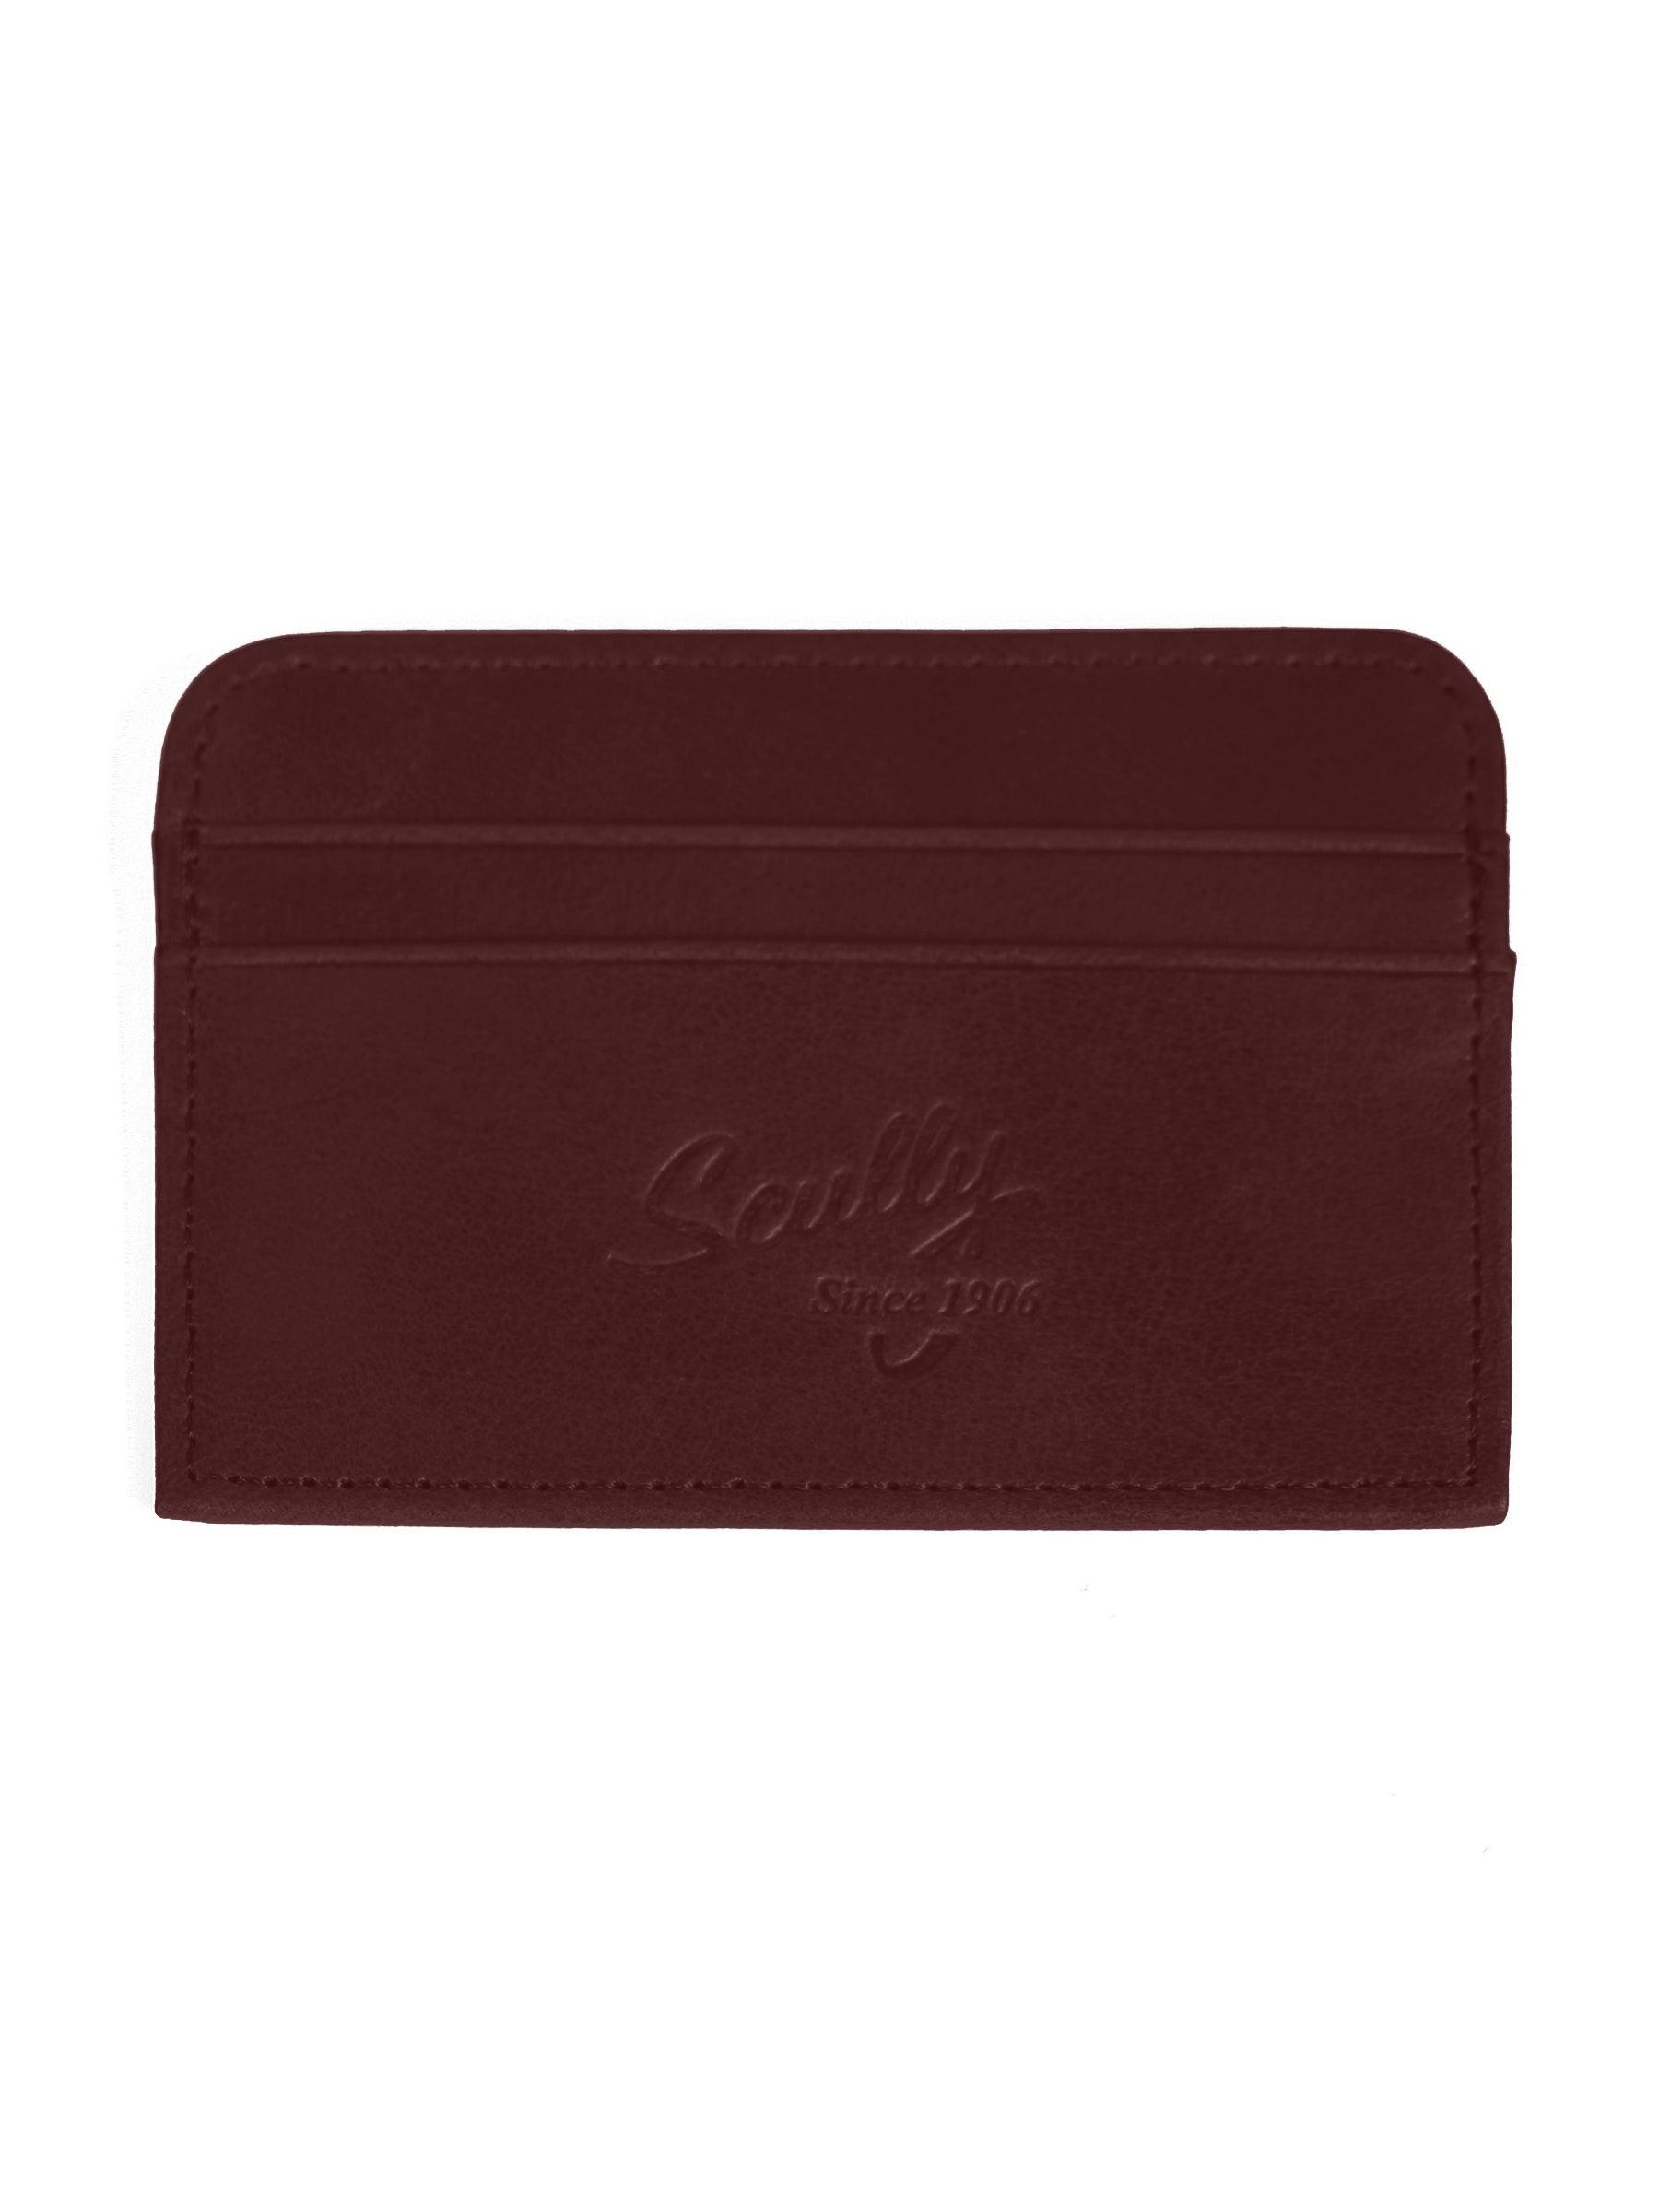 Scully CHOCOLATE CARD CASE - Flyclothing LLC